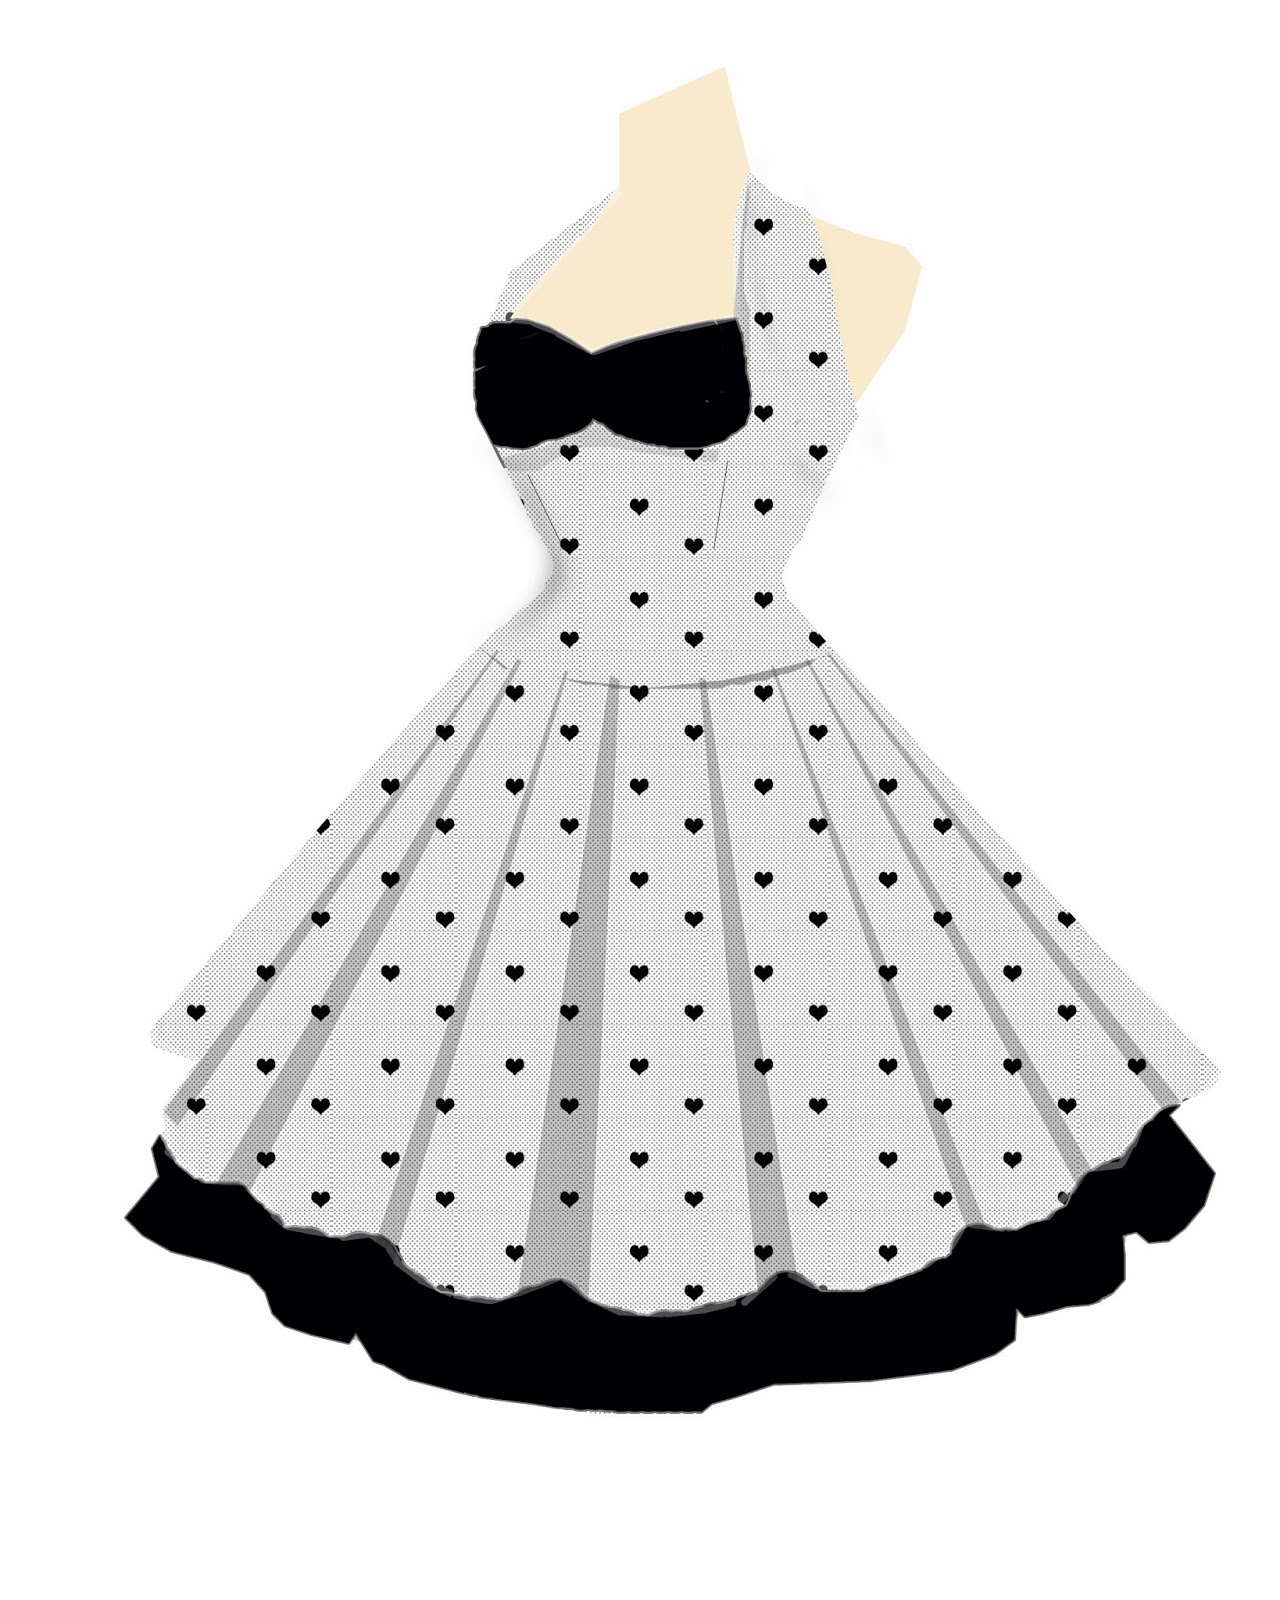 BlueBerry Hill Fashions: Rockabilly Retro Fashions LET ME KNOW WHAT YOU ...